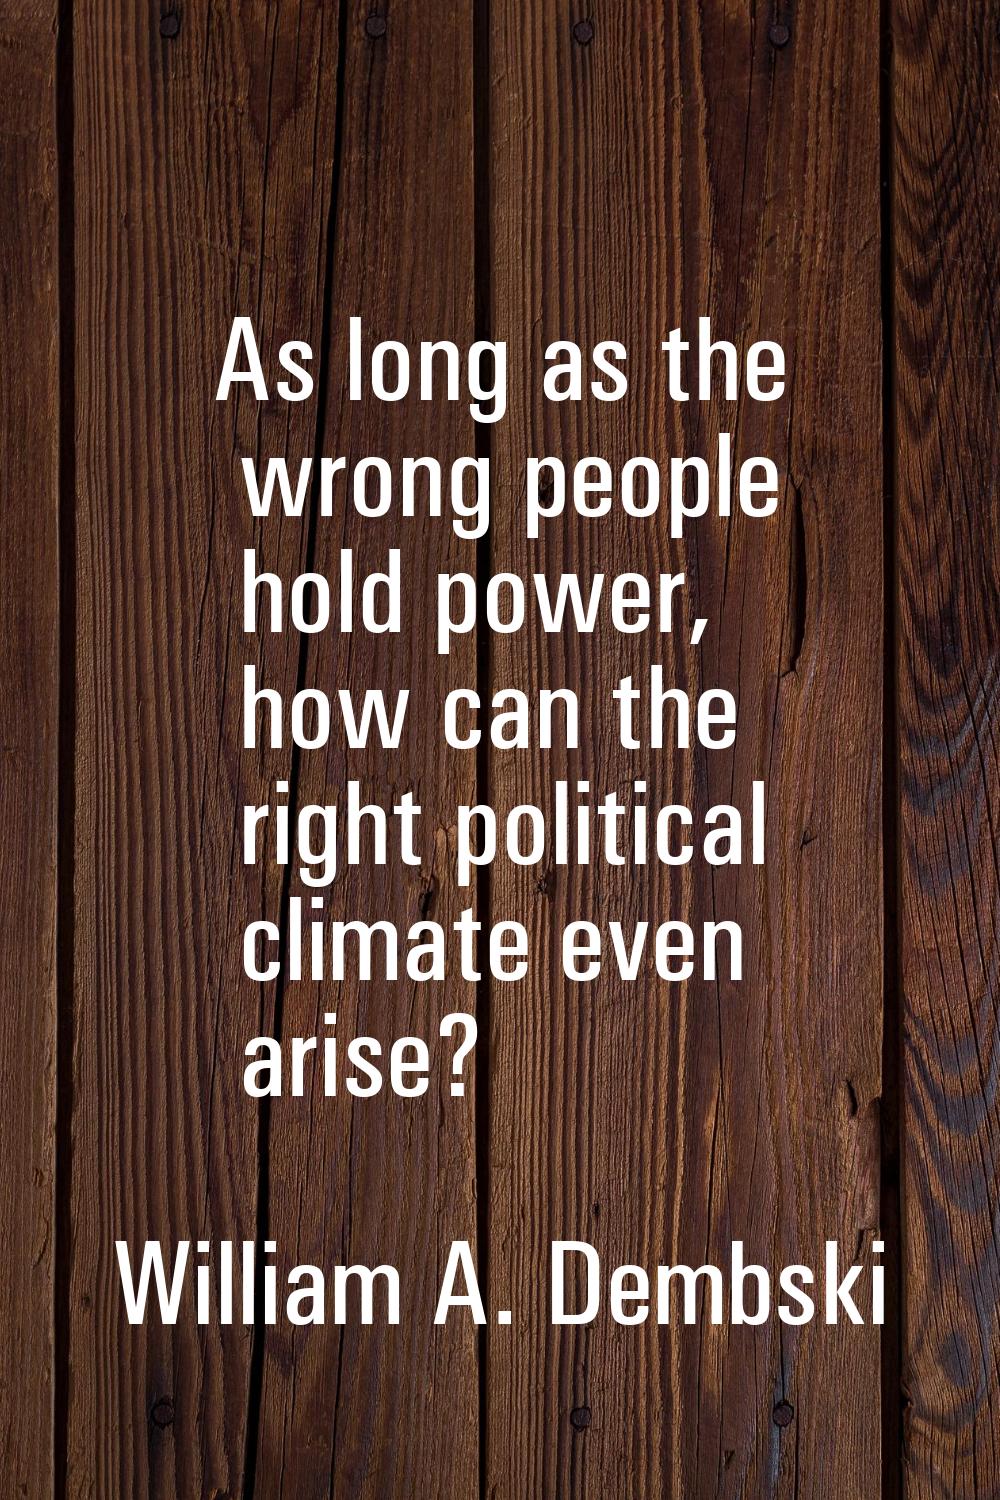 As long as the wrong people hold power, how can the right political climate even arise?